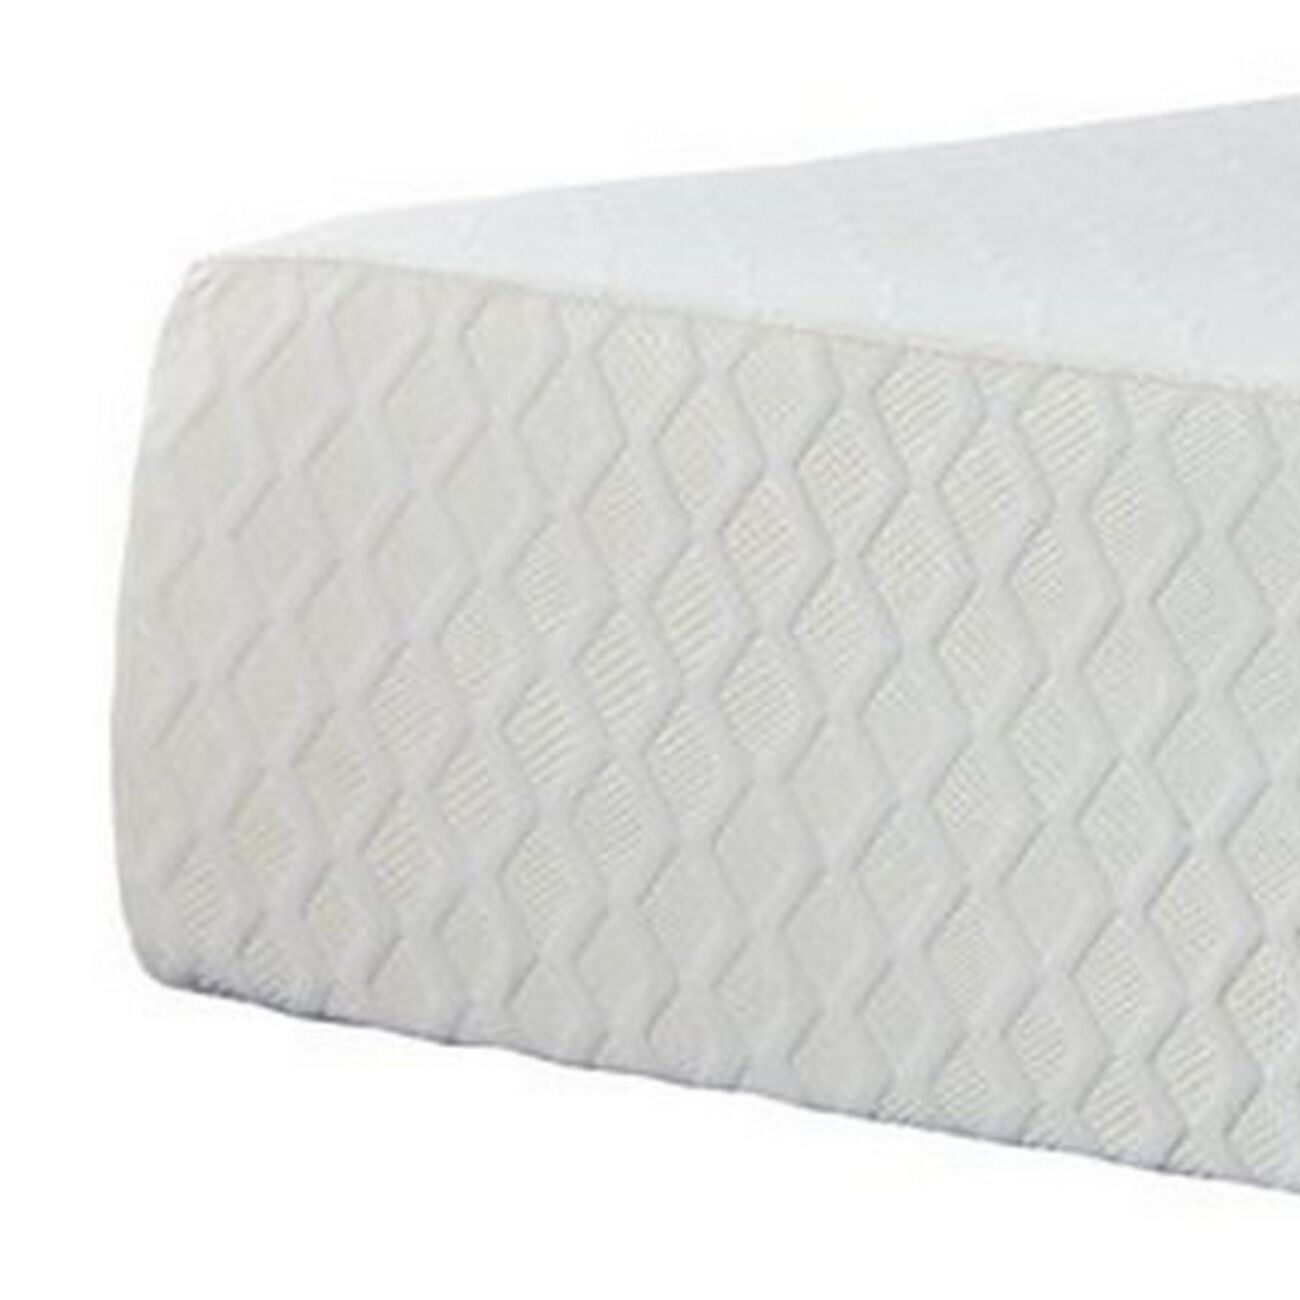 Fabric Upholstered California King Mattress with Memory Foam Layer, White